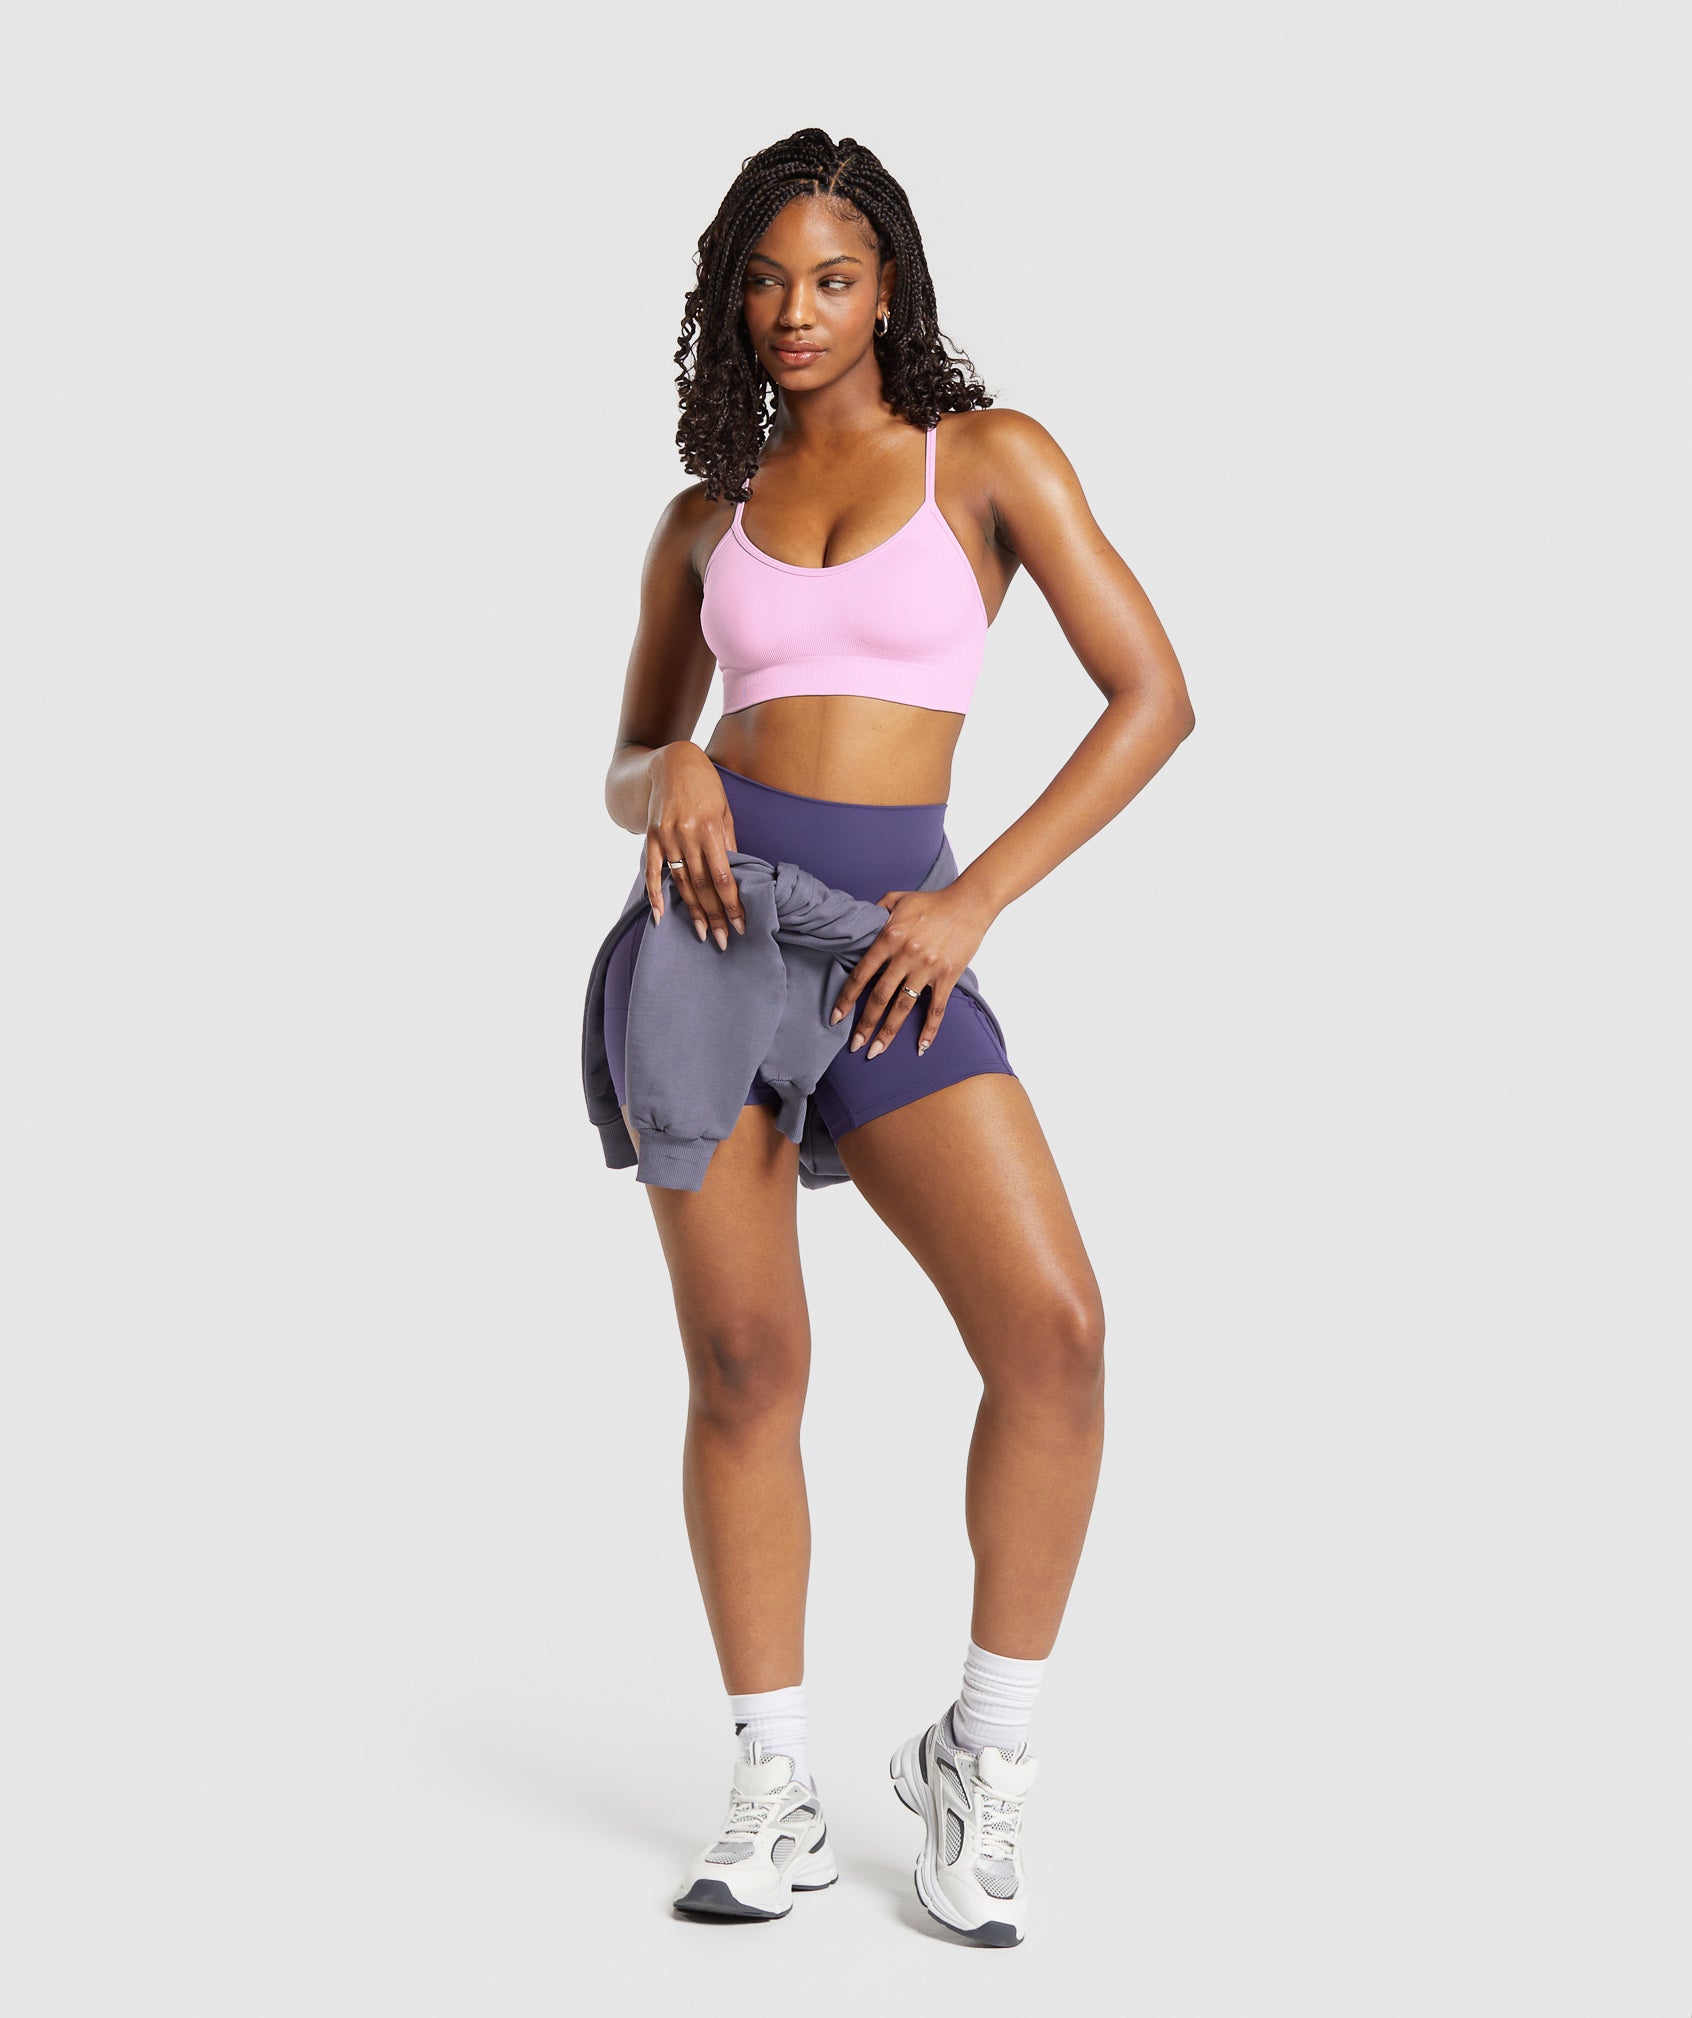 GS x Anna Sports Bra in Lilac Pink - view 4